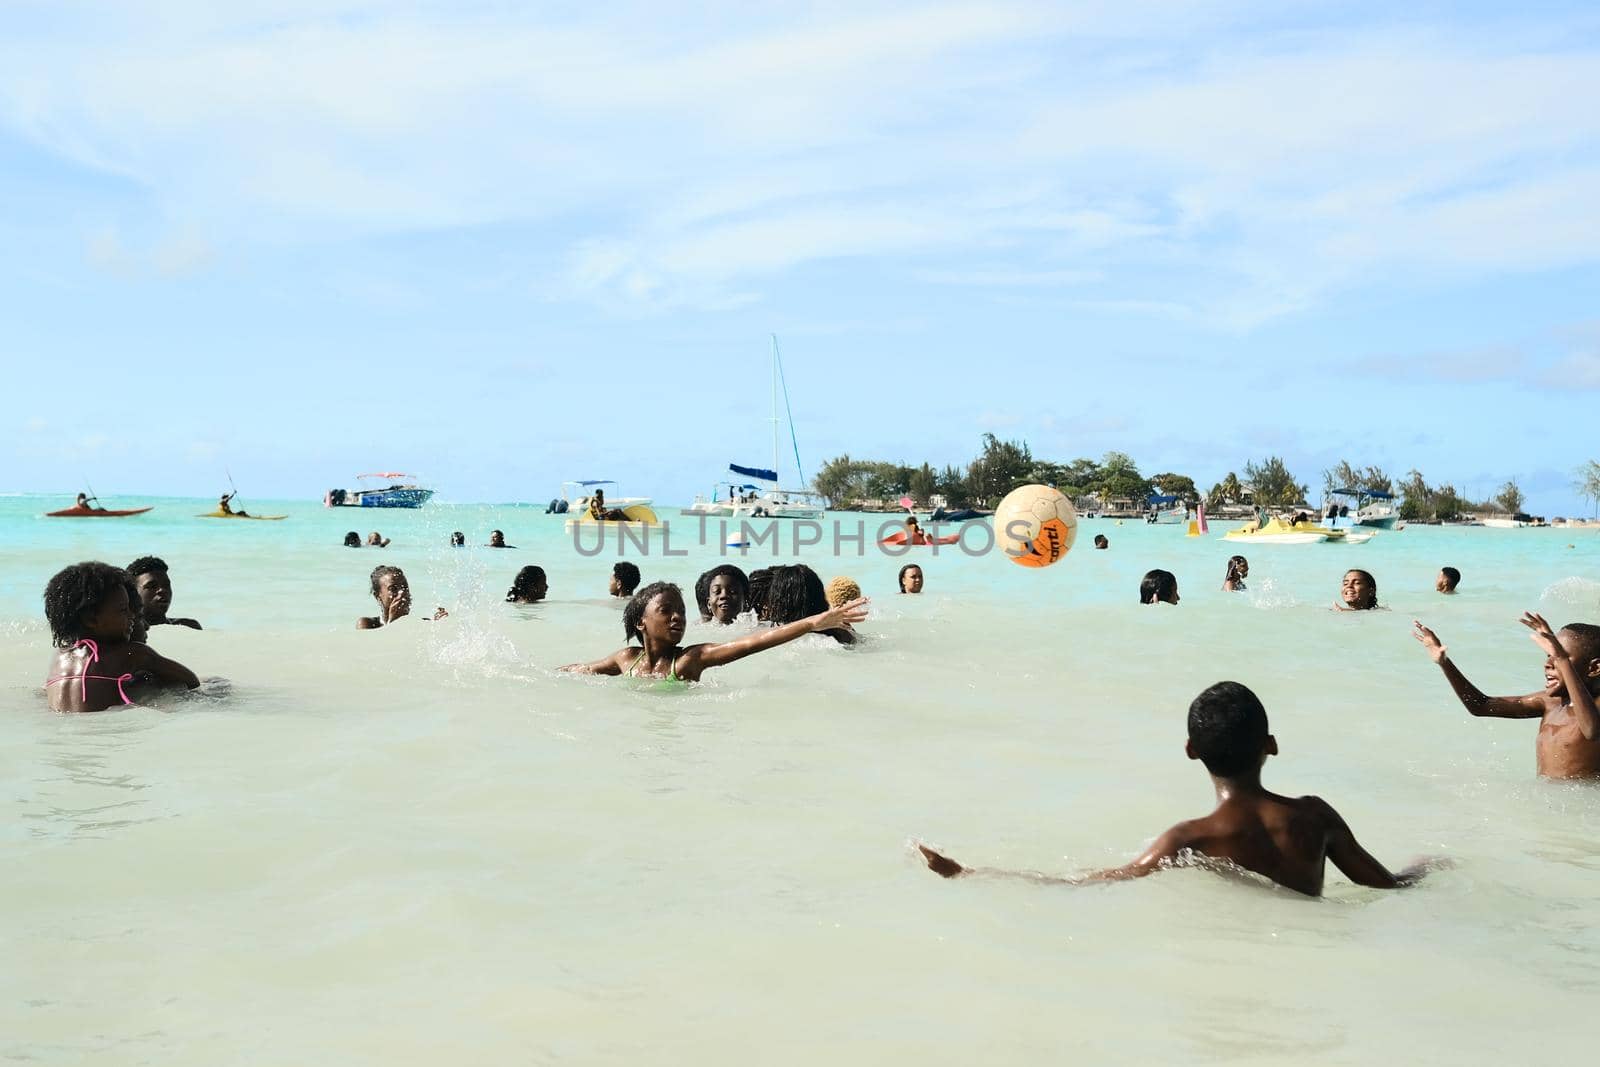 December 8, 2019 Mauritius Island, locals swim in the Indian Ocean and play with a ball by Lobachad